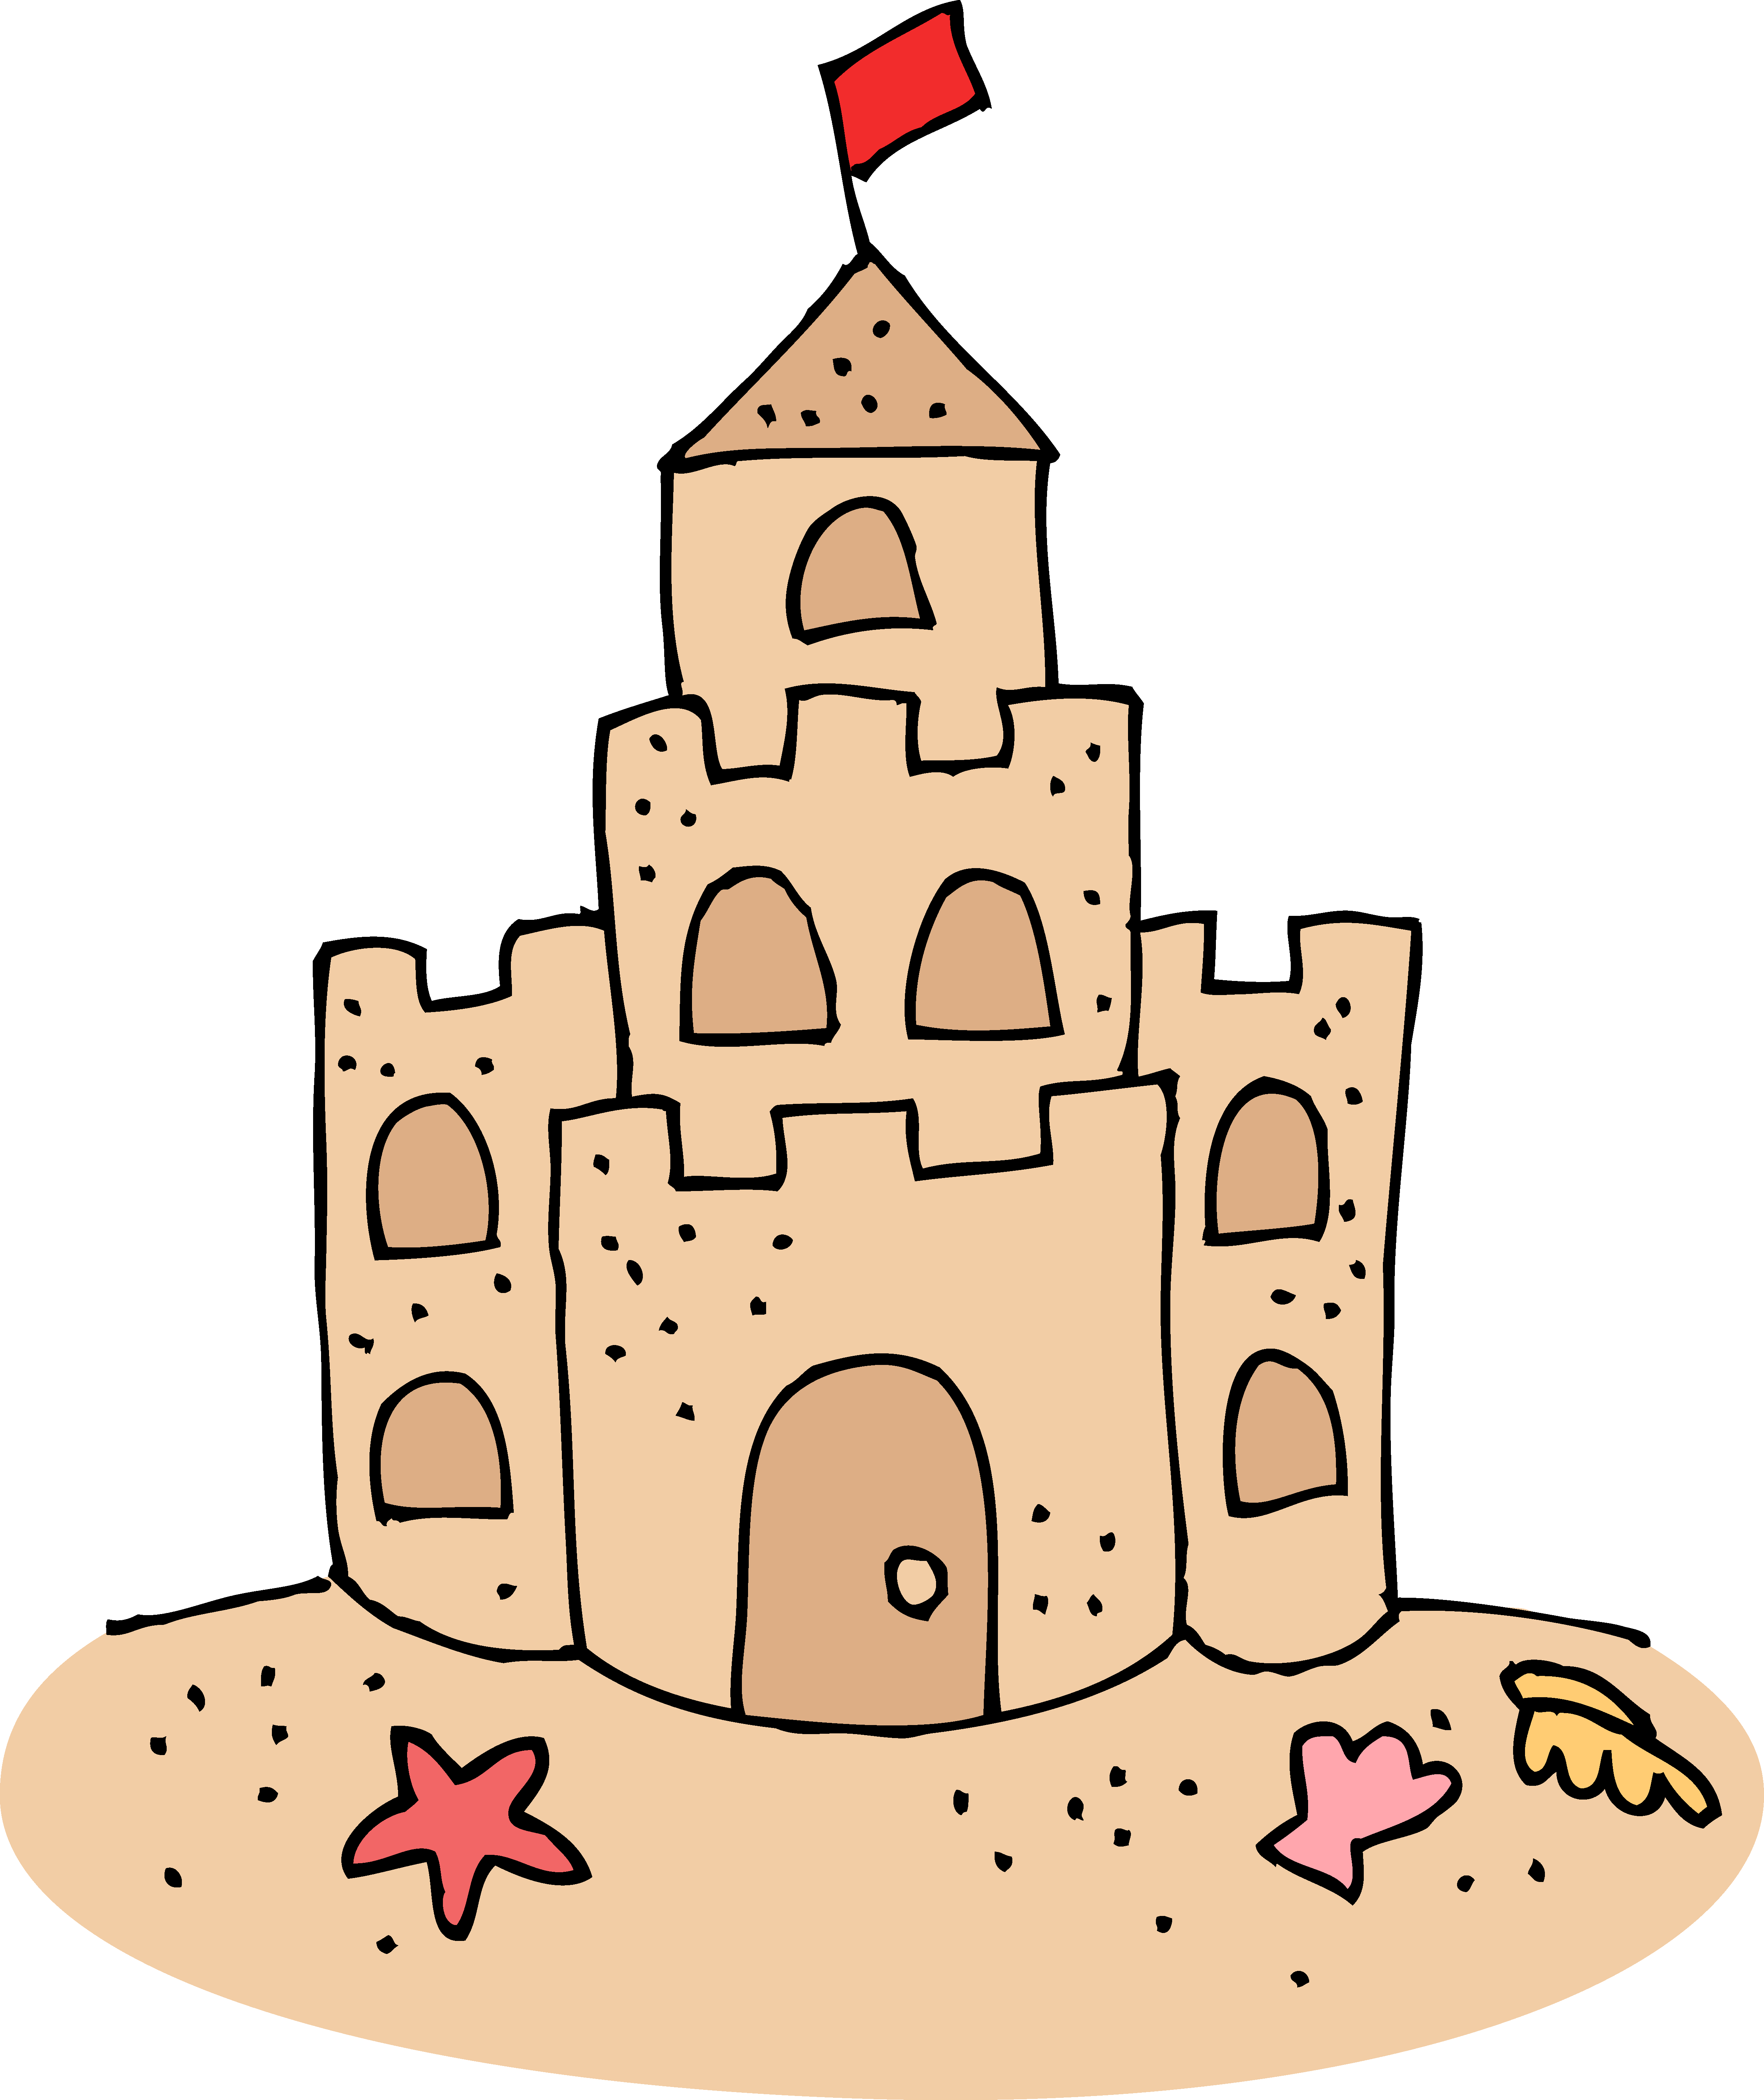 Pictures Of Cartoon Castles | Free Download Clip Art | Free Clip ...